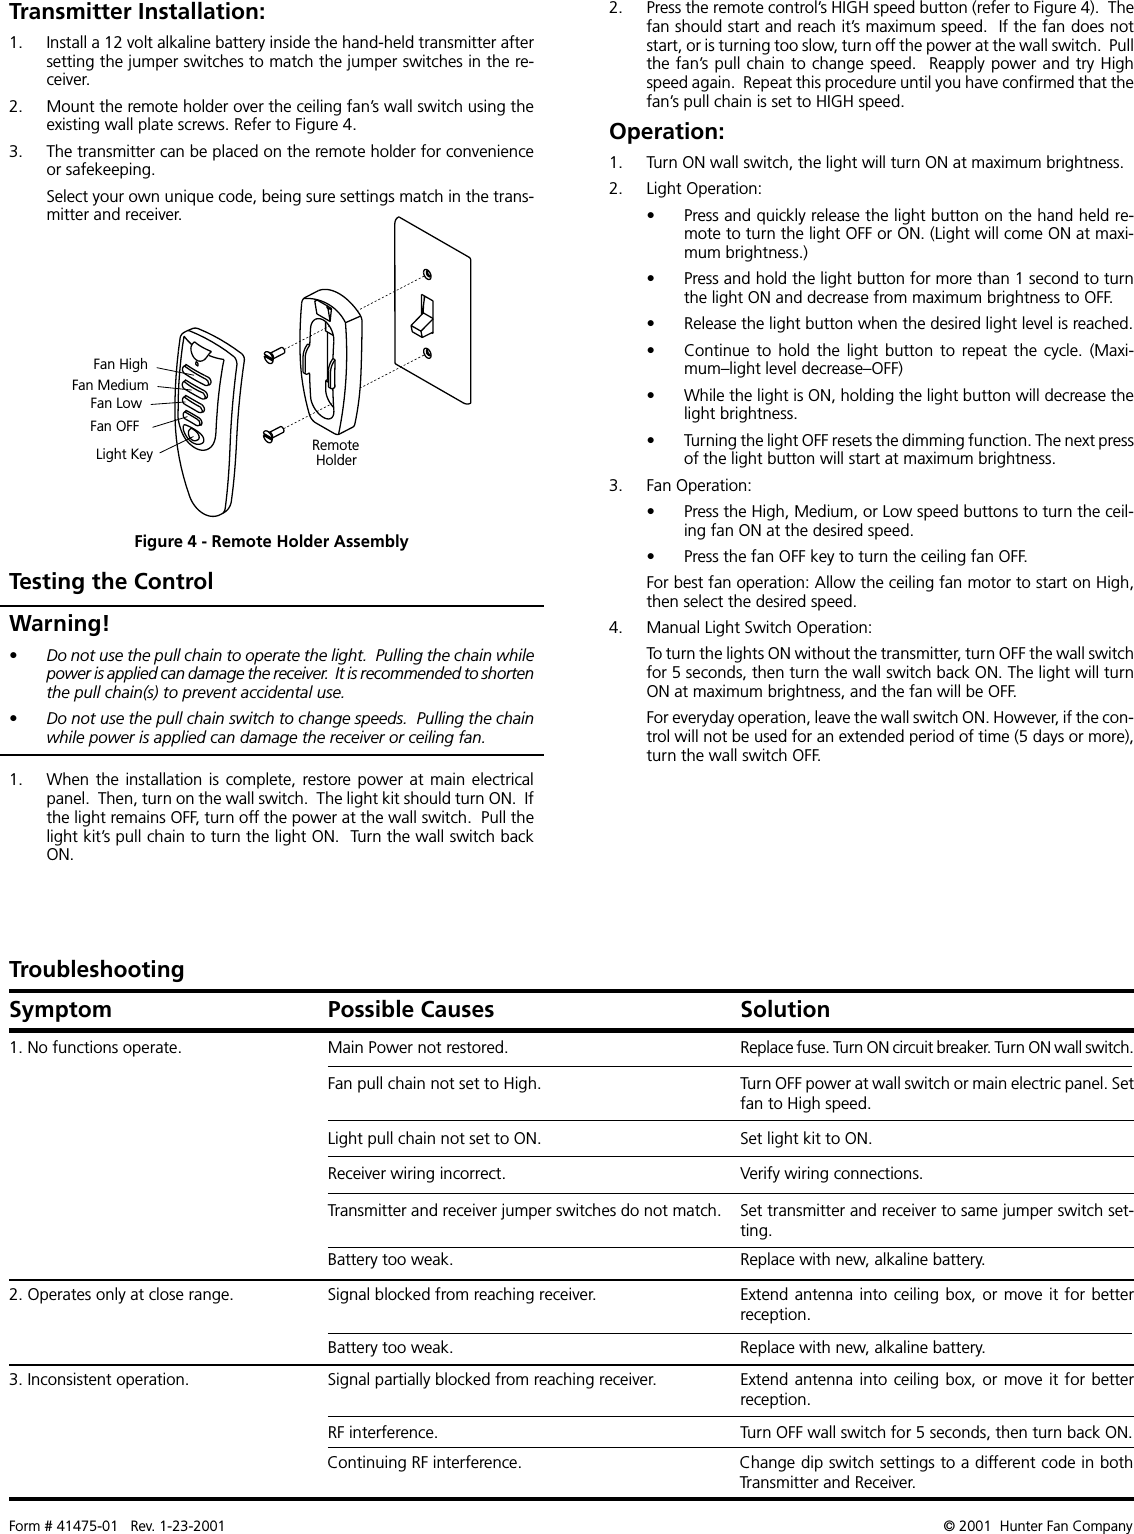 Form # 41475-01   Rev. 1-23-2001 © 2001  Hunter Fan Company2. Press the remote control’s HIGH speed button (refer to Figure 4).  Thefan should start and reach it’s maximum speed.  If the fan does notstart, or is turning too slow, turn off the power at the wall switch.  Pullthe fan’s pull chain to change speed.  Reapply power and try Highspeed again.  Repeat this procedure until you have confirmed that thefan’s pull chain is set to HIGH speed.Operation:1. Turn ON wall switch, the light will turn ON at maximum brightness.2. Light Operation:• Press and quickly release the light button on the hand held re-mote to turn the light OFF or ON. (Light will come ON at maxi-mum brightness.)• Press and hold the light button for more than 1 second to turnthe light ON and decrease from maximum brightness to OFF.• Release the light button when the desired light level is reached.• Continue to  hold  the light button  to  repeat the  cycle.  (Maxi-mum–light level decrease–OFF)• While the light is ON, holding the light button will decrease thelight brightness.• Turning the light OFF resets the dimming function. The next pressof the light button will start at maximum brightness.3. Fan Operation:• Press the High, Medium, or Low speed buttons to turn the ceil-ing fan ON at the desired speed.• Press the fan OFF key to turn the ceiling fan OFF.For best fan operation: Allow the ceiling fan motor to start on High,then select the desired speed.4. Manual Light Switch Operation:To turn the lights ON without the transmitter, turn OFF the wall switchfor 5 seconds, then turn the wall switch back ON. The light will turnON at maximum brightness, and the fan will be OFF.For everyday operation, leave the wall switch ON. However, if the con-trol will not be used for an extended period of time (5 days or more),turn the wall switch OFF.Testing the Control1. When the installation is  complete, restore power at  main electricalpanel.  Then, turn on the wall switch.  The light kit should turn ON.  Ifthe light remains OFF, turn off the power at the wall switch.  Pull thelight kit’s pull chain to turn the light ON.  Turn the wall switch backON.Warning!• Do not use the pull chain to operate the light.  Pulling the chain whilepower is applied can damage the receiver.  It is recommended to shortenthe pull chain(s) to prevent accidental use.• Do not use the pull chain switch to change speeds.  Pulling the chainwhile power is applied can damage the receiver or ceiling fan.Symptom Possible Causes SolutionTroubleshooting1. No functions operate.2. Operates only at close range.3. Inconsistent operation.Main Power not restored.Signal blocked from reaching receiver.Signal partially blocked from reaching receiver.Replace fuse. Turn ON circuit breaker. Turn ON wall switch.Extend antenna into ceiling box, or move it for betterreception.Extend antenna into ceiling box, or move it for betterreception.Fan pull chain not set to High.Light pull chain not set to ON.Receiver wiring incorrect.Transmitter and receiver jumper switches do not match.Battery too weak.Turn OFF power at wall switch or main electric panel. Setfan to High speed.Set light kit to ON.Verify wiring connections.Set transmitter and receiver to same jumper switch set-ting.Replace with new, alkaline battery.Battery too weak. Replace with new, alkaline battery.RF interference. Turn OFF wall switch for 5 seconds, then turn back ON.Continuing RF interference. Change dip switch settings to a different code in bothTransmitter and Receiver.Transmitter Installation:1. Install a 12 volt alkaline battery inside the hand-held transmitter aftersetting the jumper switches to match the jumper switches in the re-ceiver.2. Mount the remote holder over the ceiling fan’s wall switch using theexisting wall plate screws. Refer to Figure 4.3. The transmitter can be placed on the remote holder for convenienceor safekeeping.Select your own unique code, being sure settings match in the trans-mitter and receiver.Fan HighFan MediumFan LowFan OFFLight Key RemoteHolderFigure 4 - Remote Holder Assembly